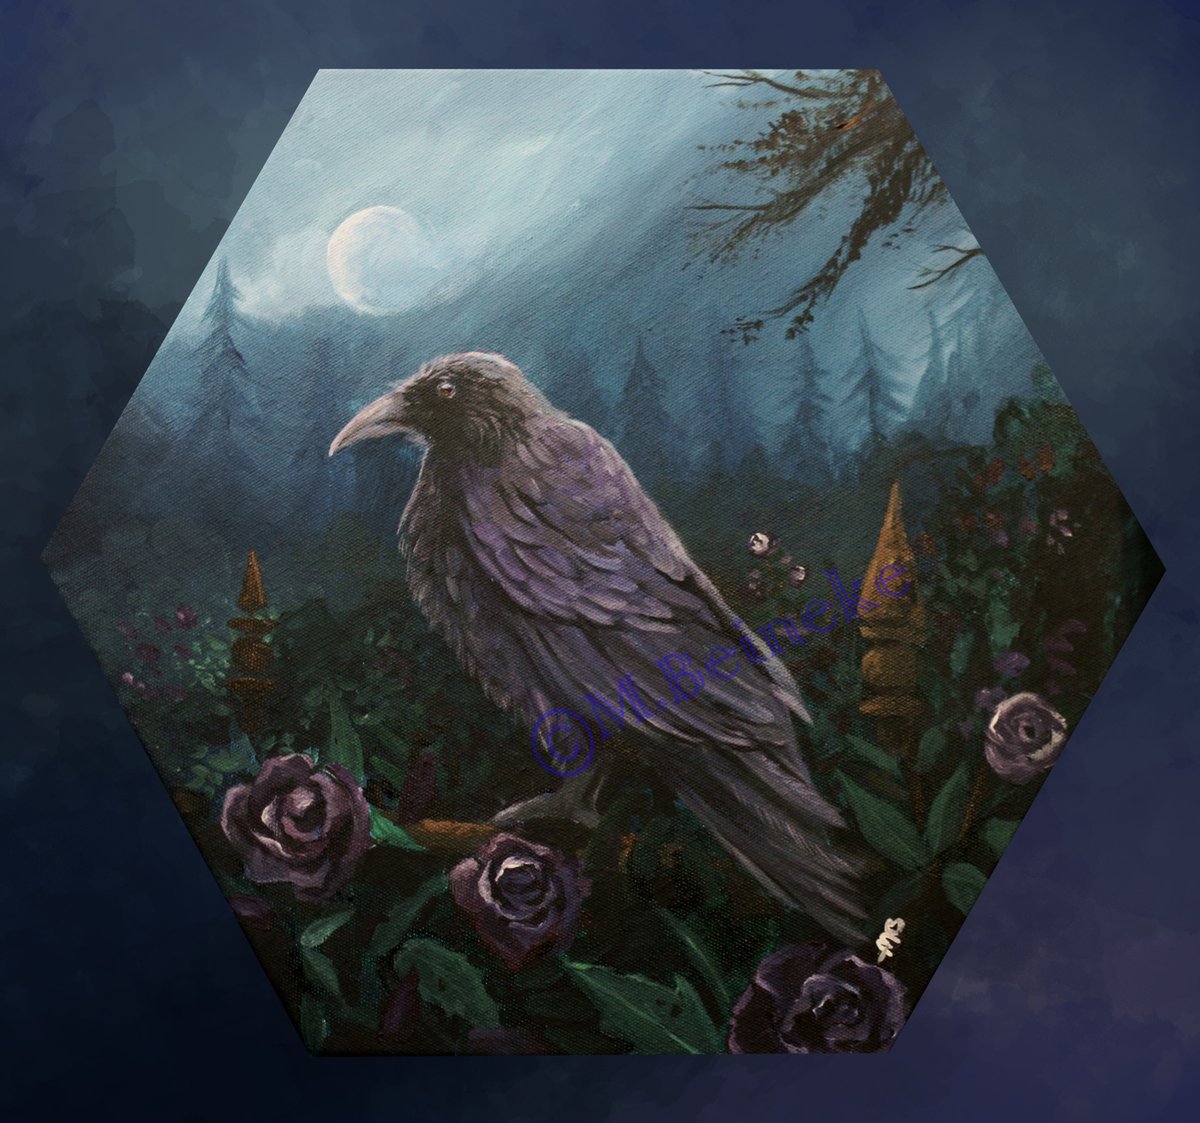 I do normal stuff on occasion. 'Violet and Roses' acrylic on a 16x16 hexagonal canvas
This little guy has already been adopted :) 
#crowart #crow #rosepainting #gothicart #gothicpainting